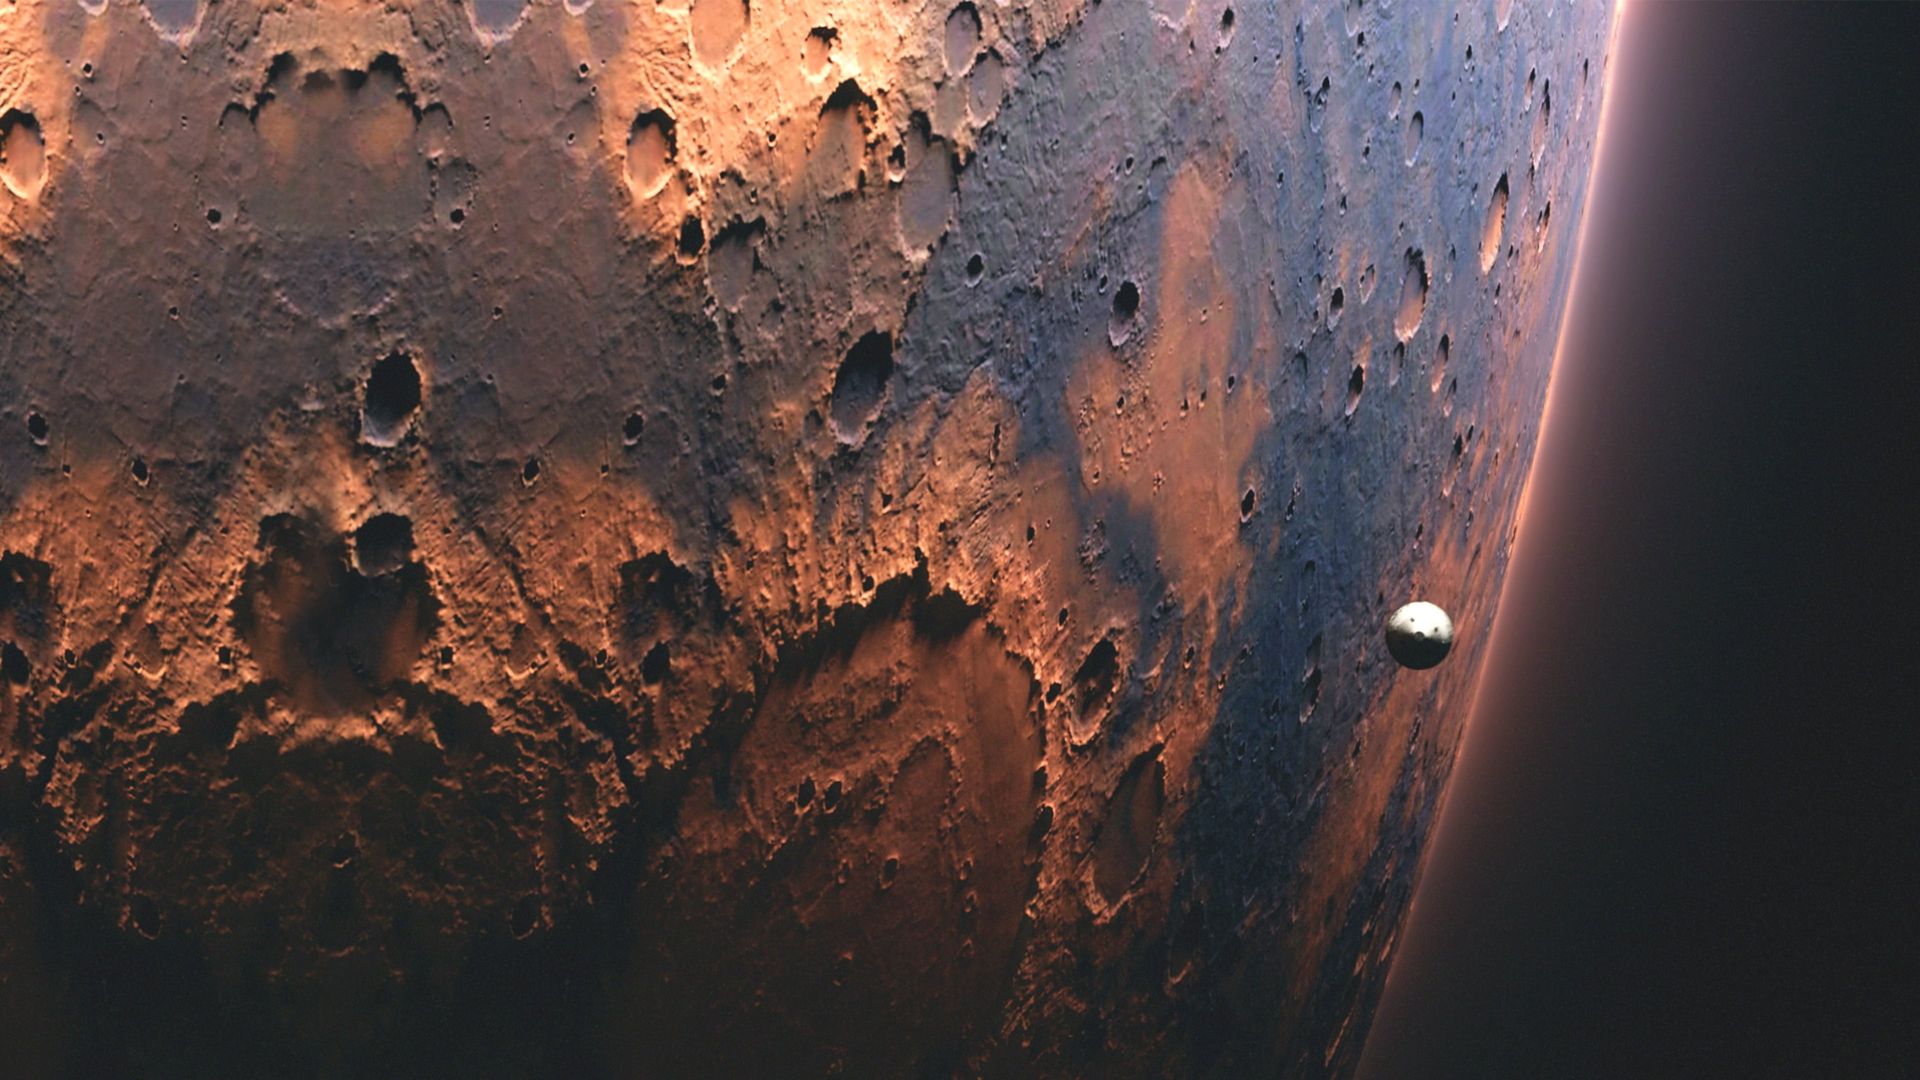 Mars: One Day on the Red Planet background